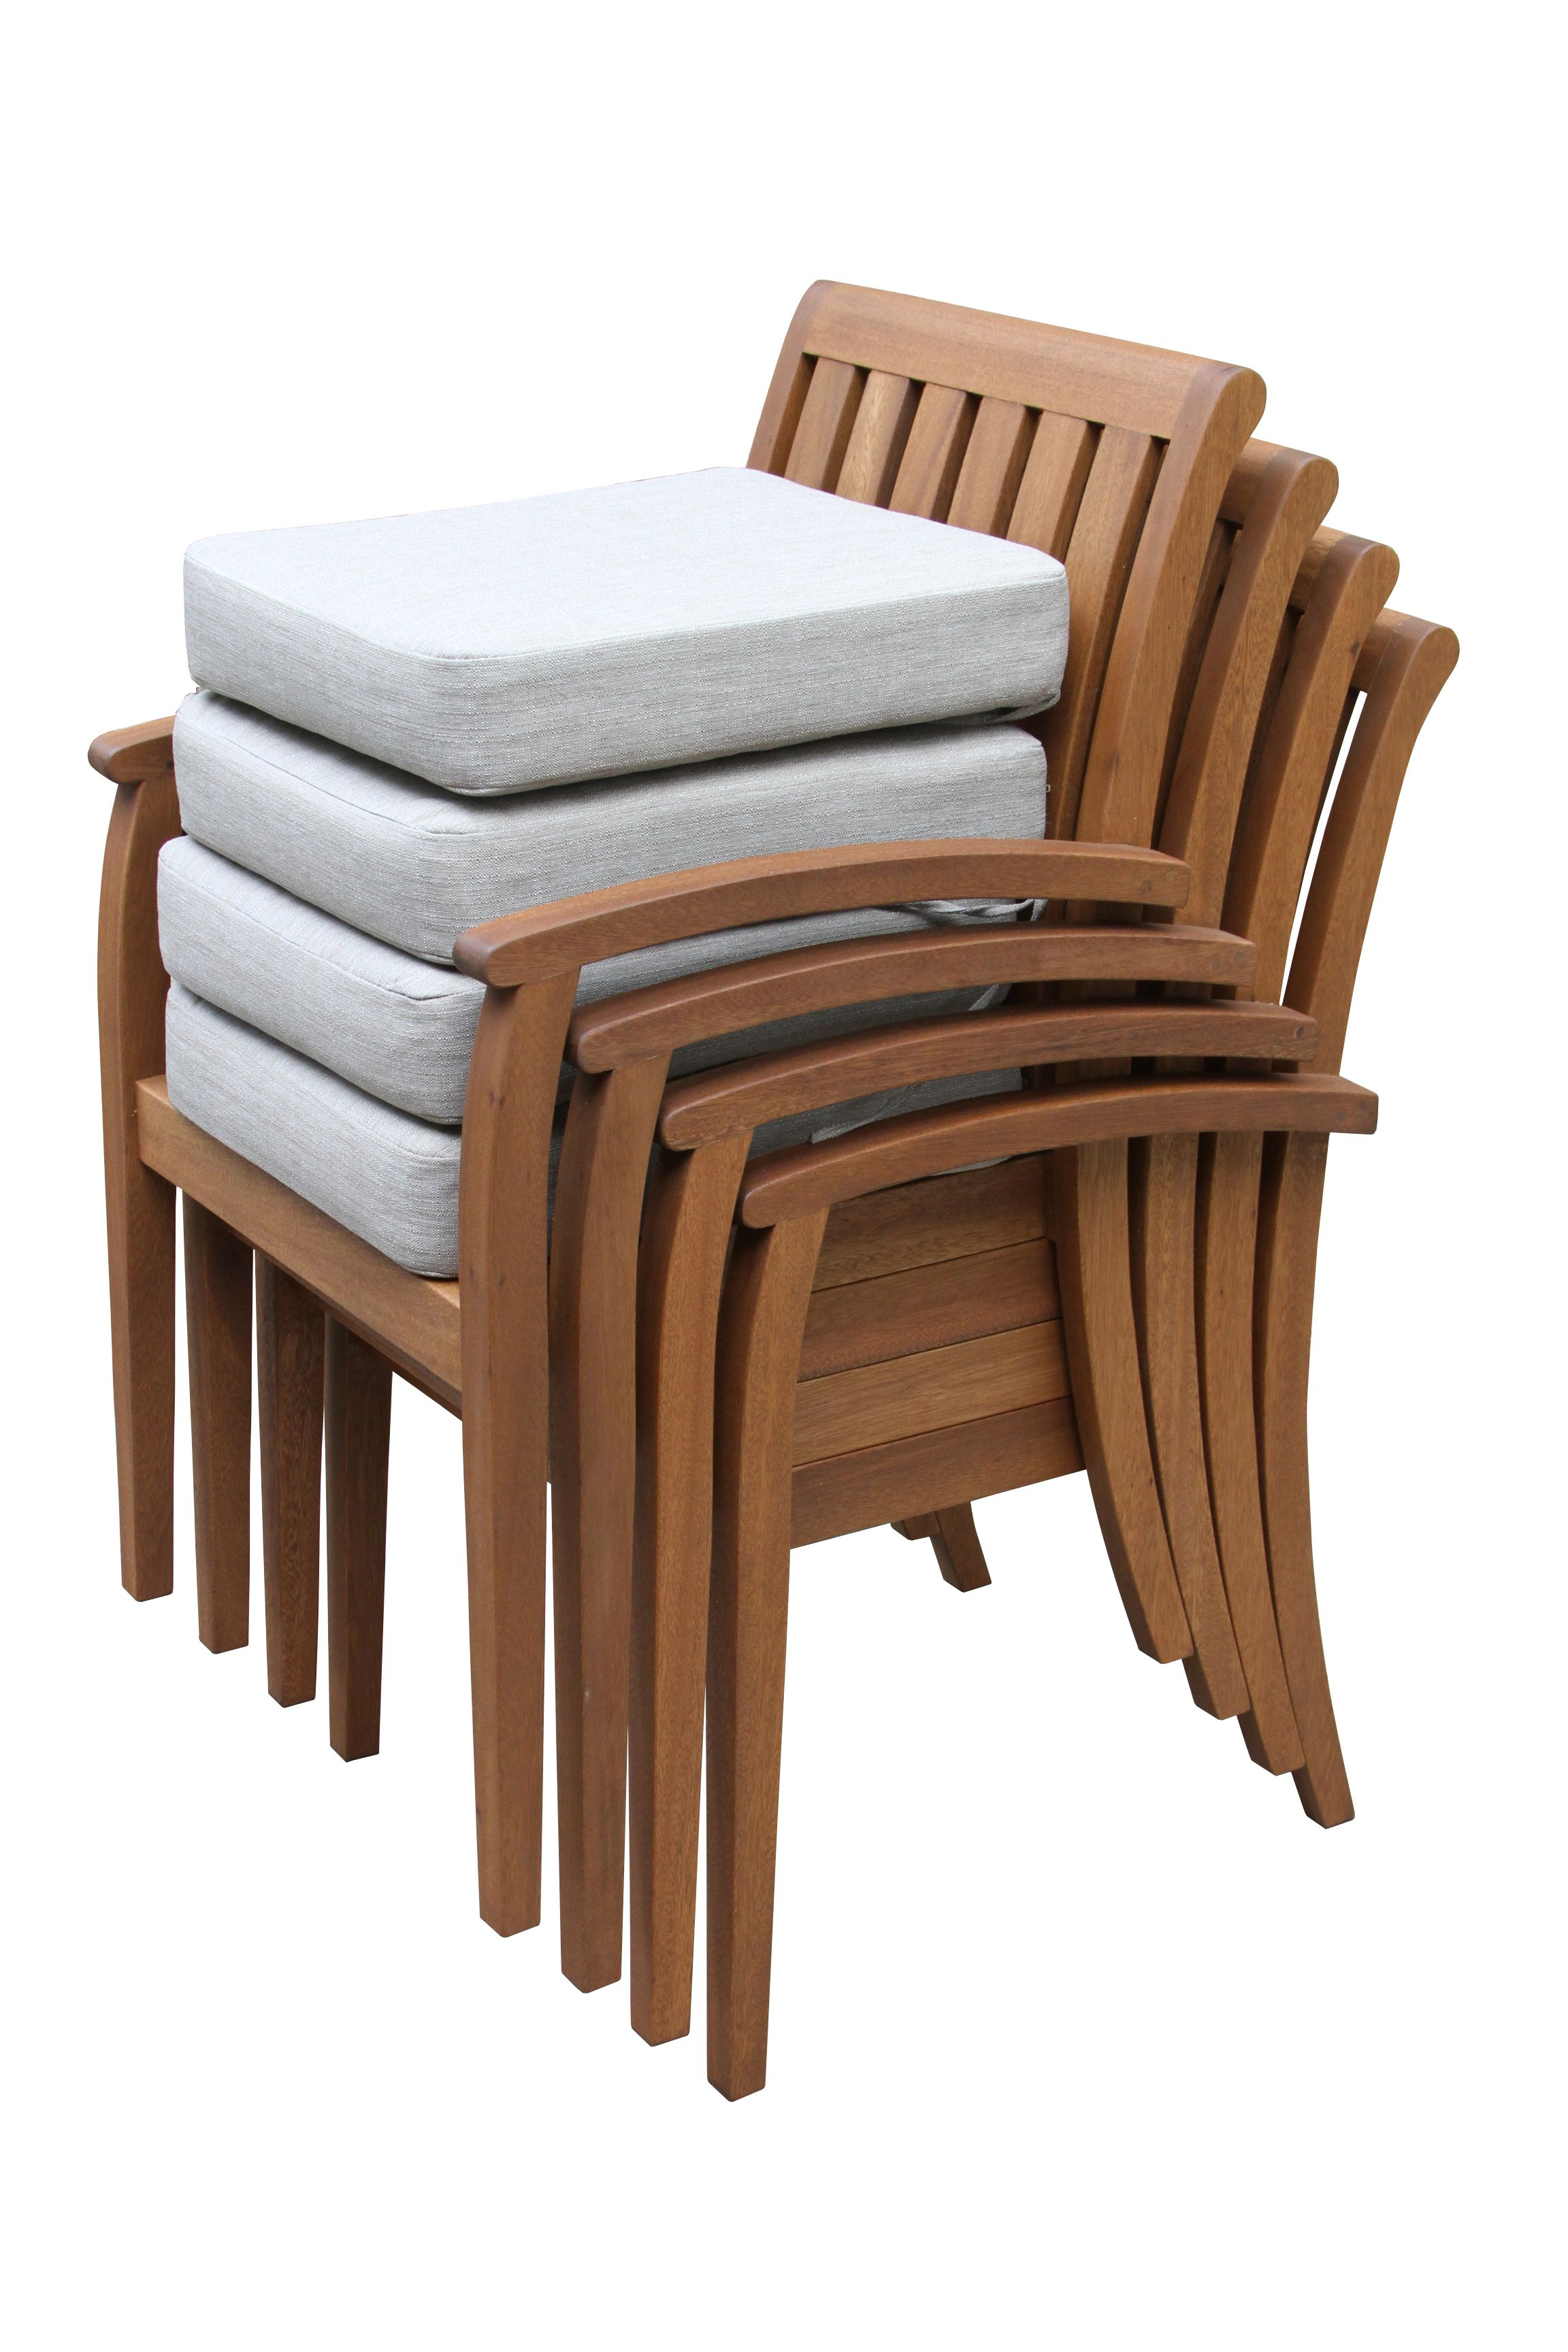 Outdoor Interiors Eucalyptus Deluxe Stacking Dining Armchairs - Set of 4